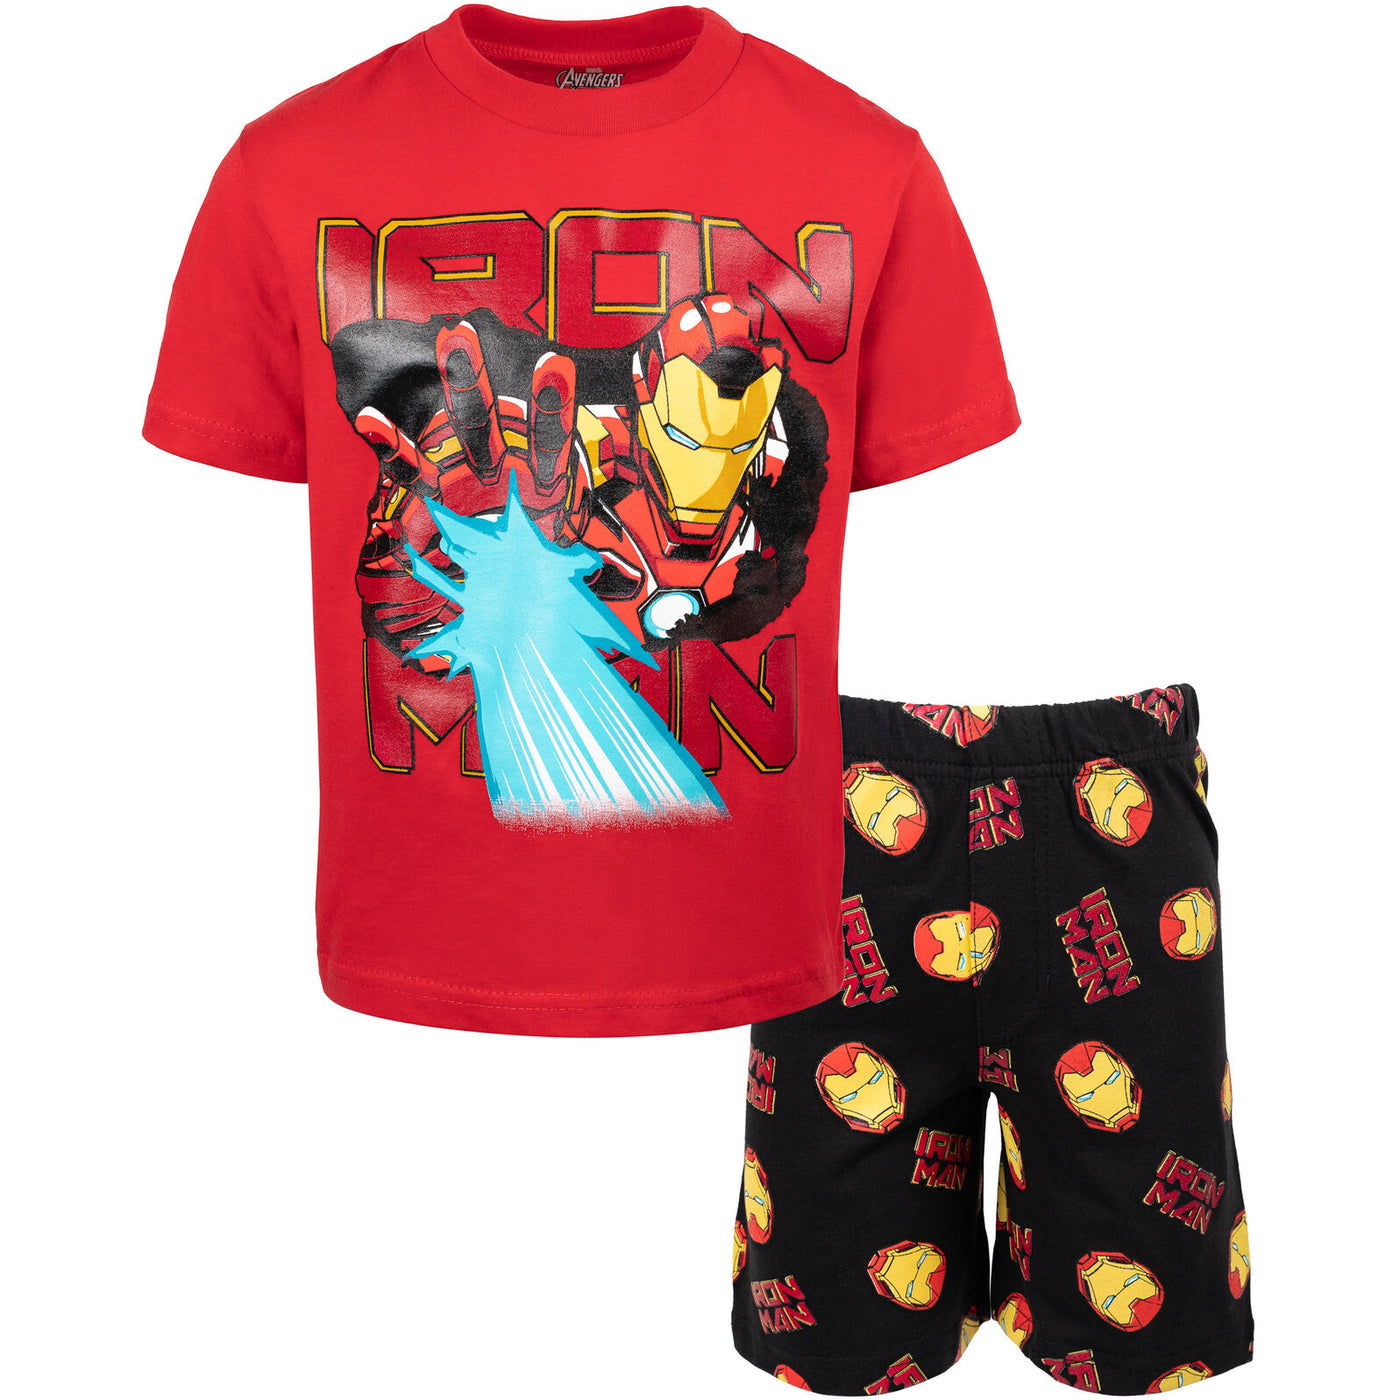 Marvel Avengers Iron Man T-Shirt and French Terry Shorts Outfit Set